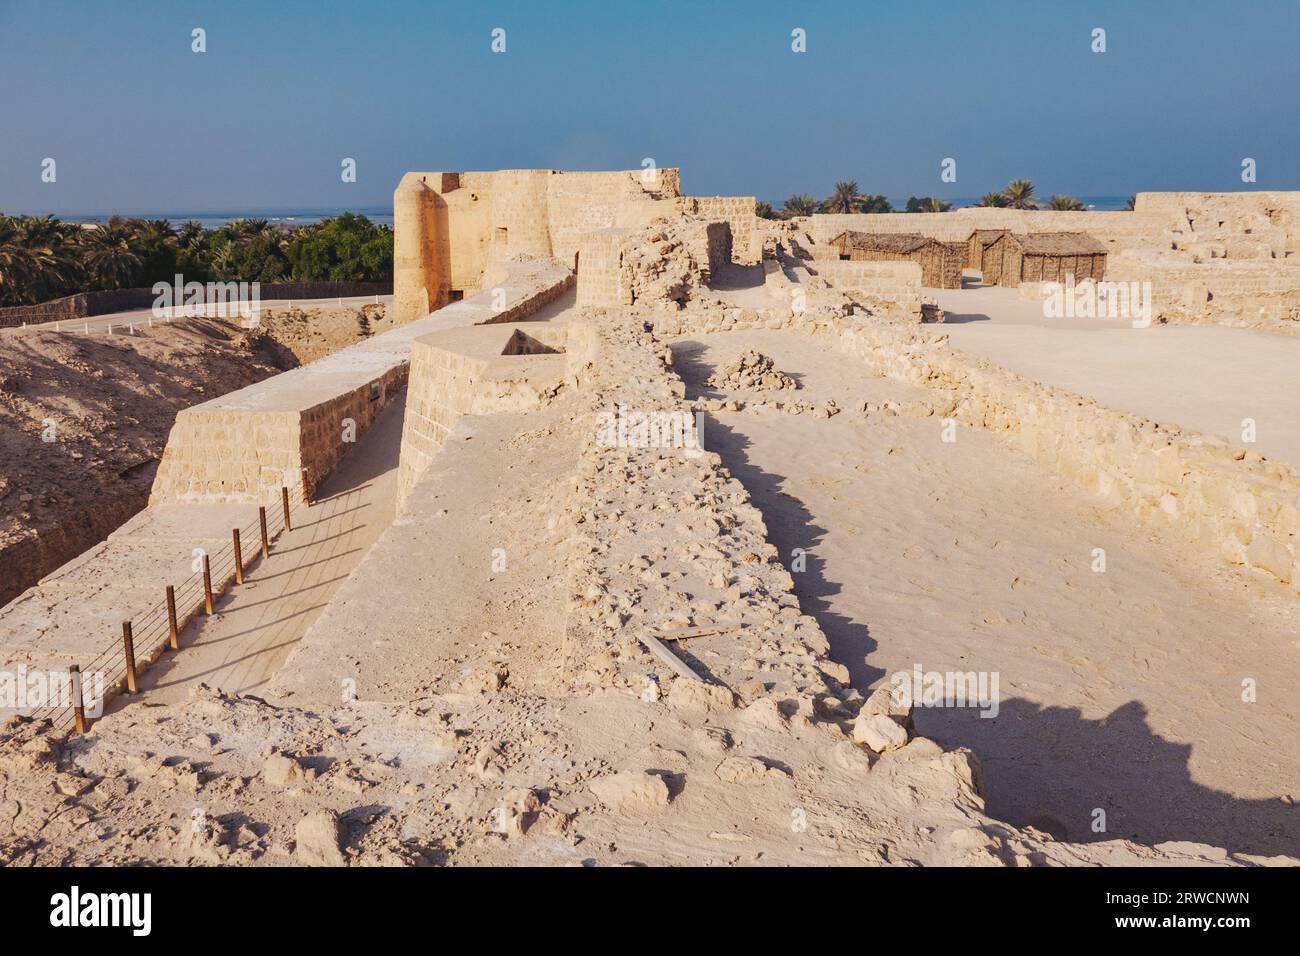 Qal'at al-Bahrain, a fort dating back to 2300 BCE and abandoned by the Portuguese in the 16th century, on the northern coast of Bahrain island Stock Photo